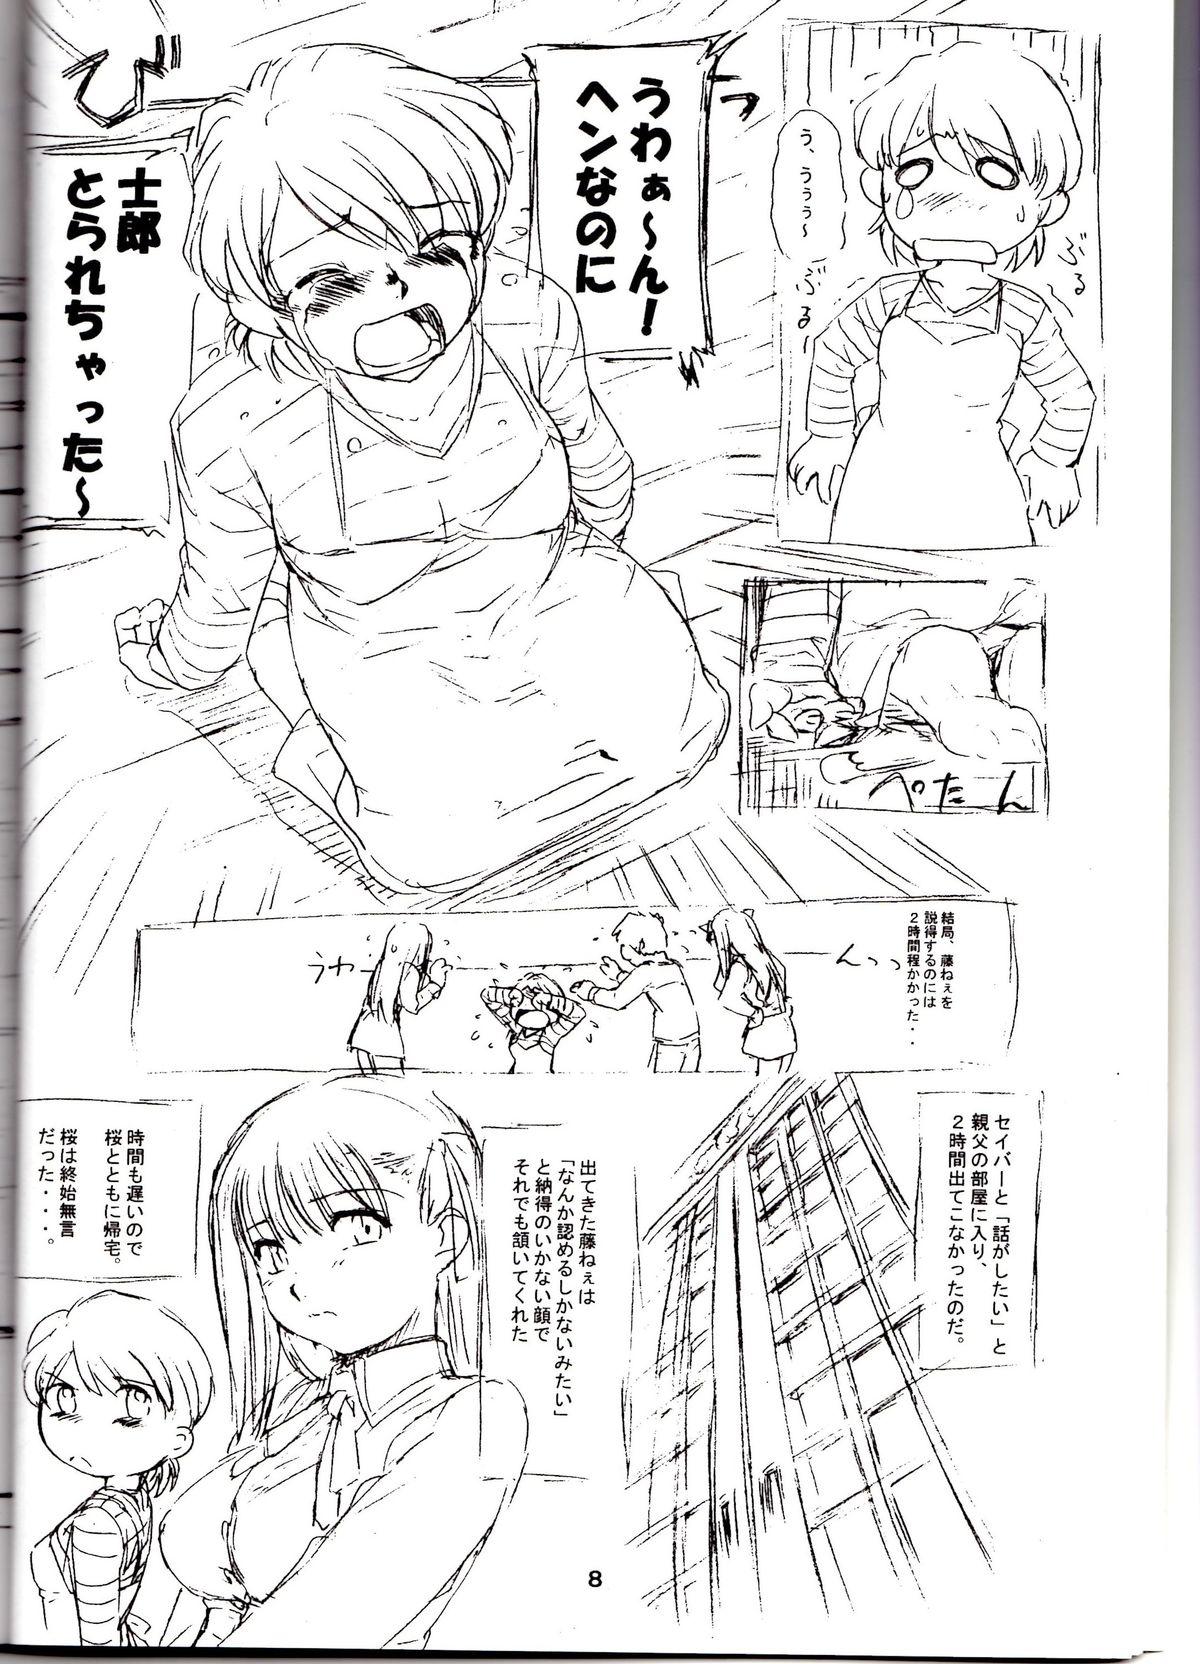 Cameltoe think BLUE - Fate stay night Oldman - Page 7